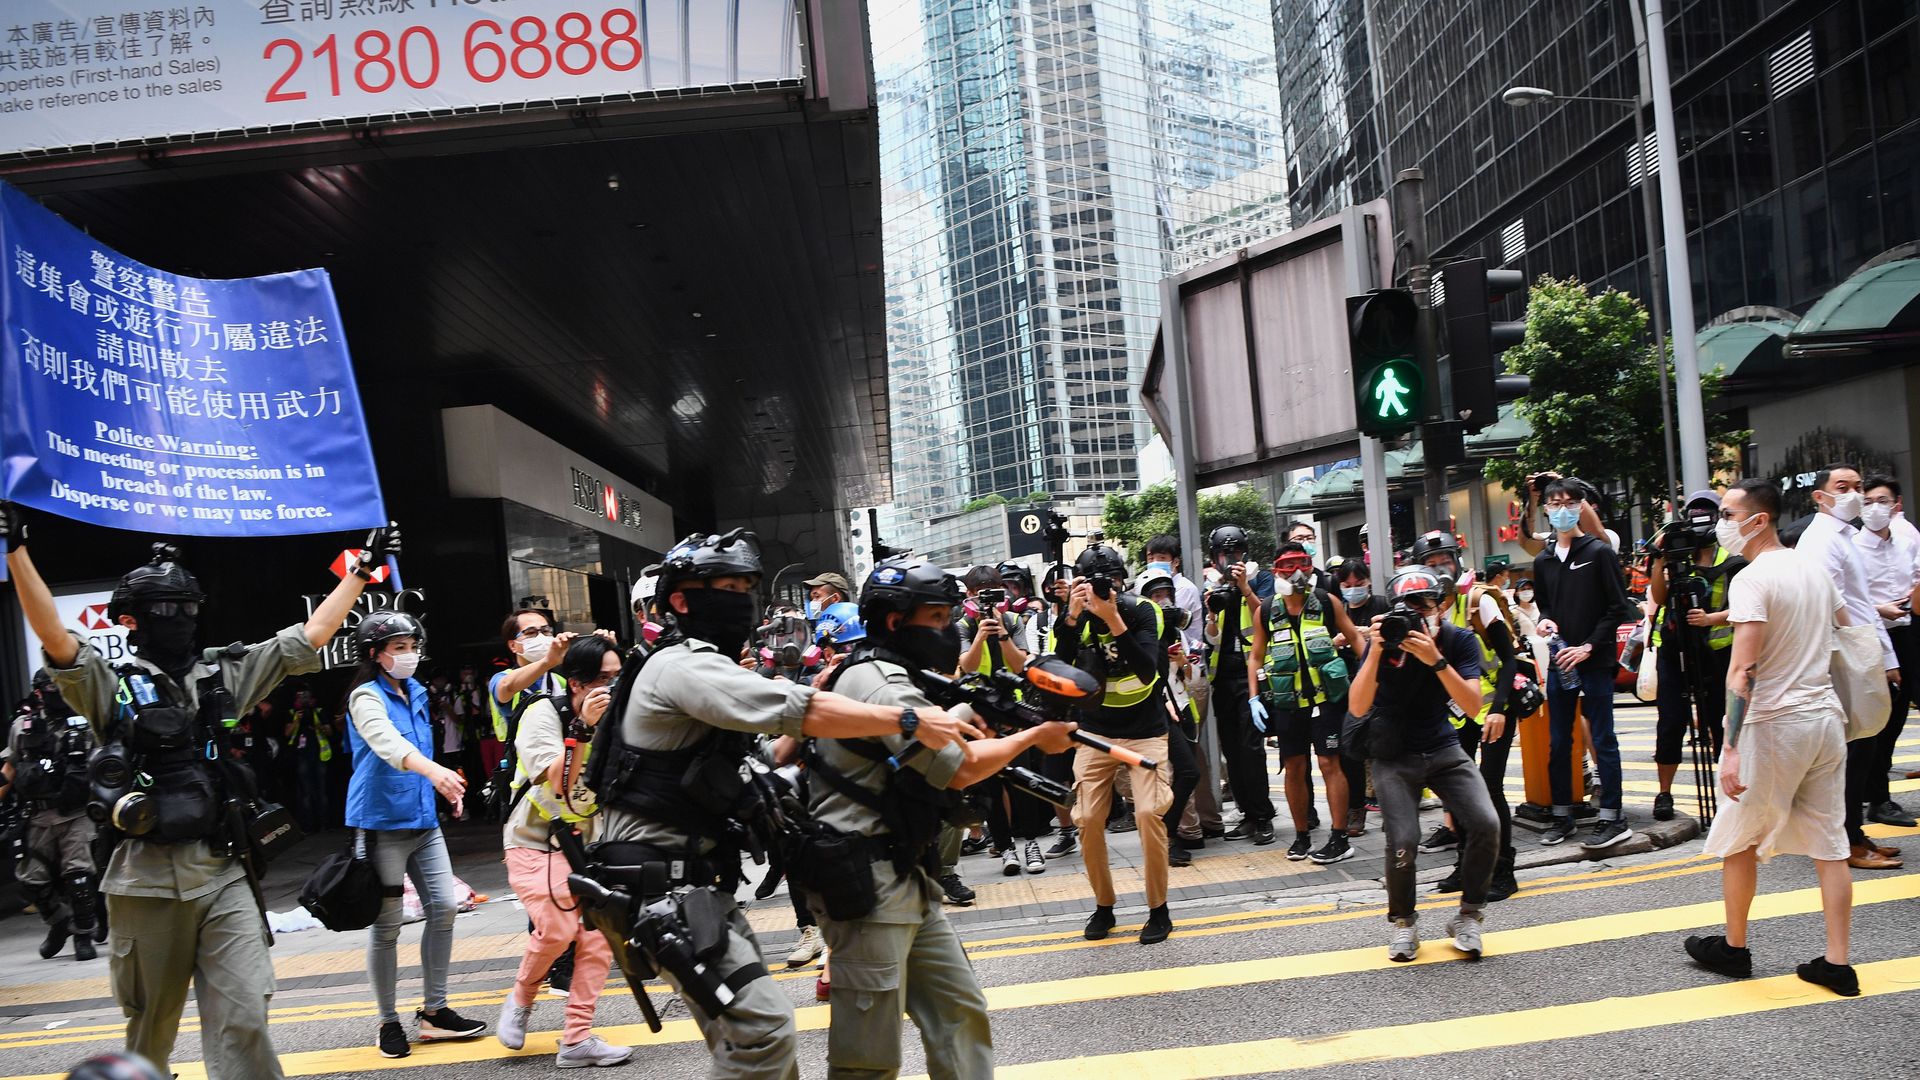 Hong Kong riot police (L) issue a warning as they plan to clear away people gathered in the Central district of downtown Hong Kong on May 27